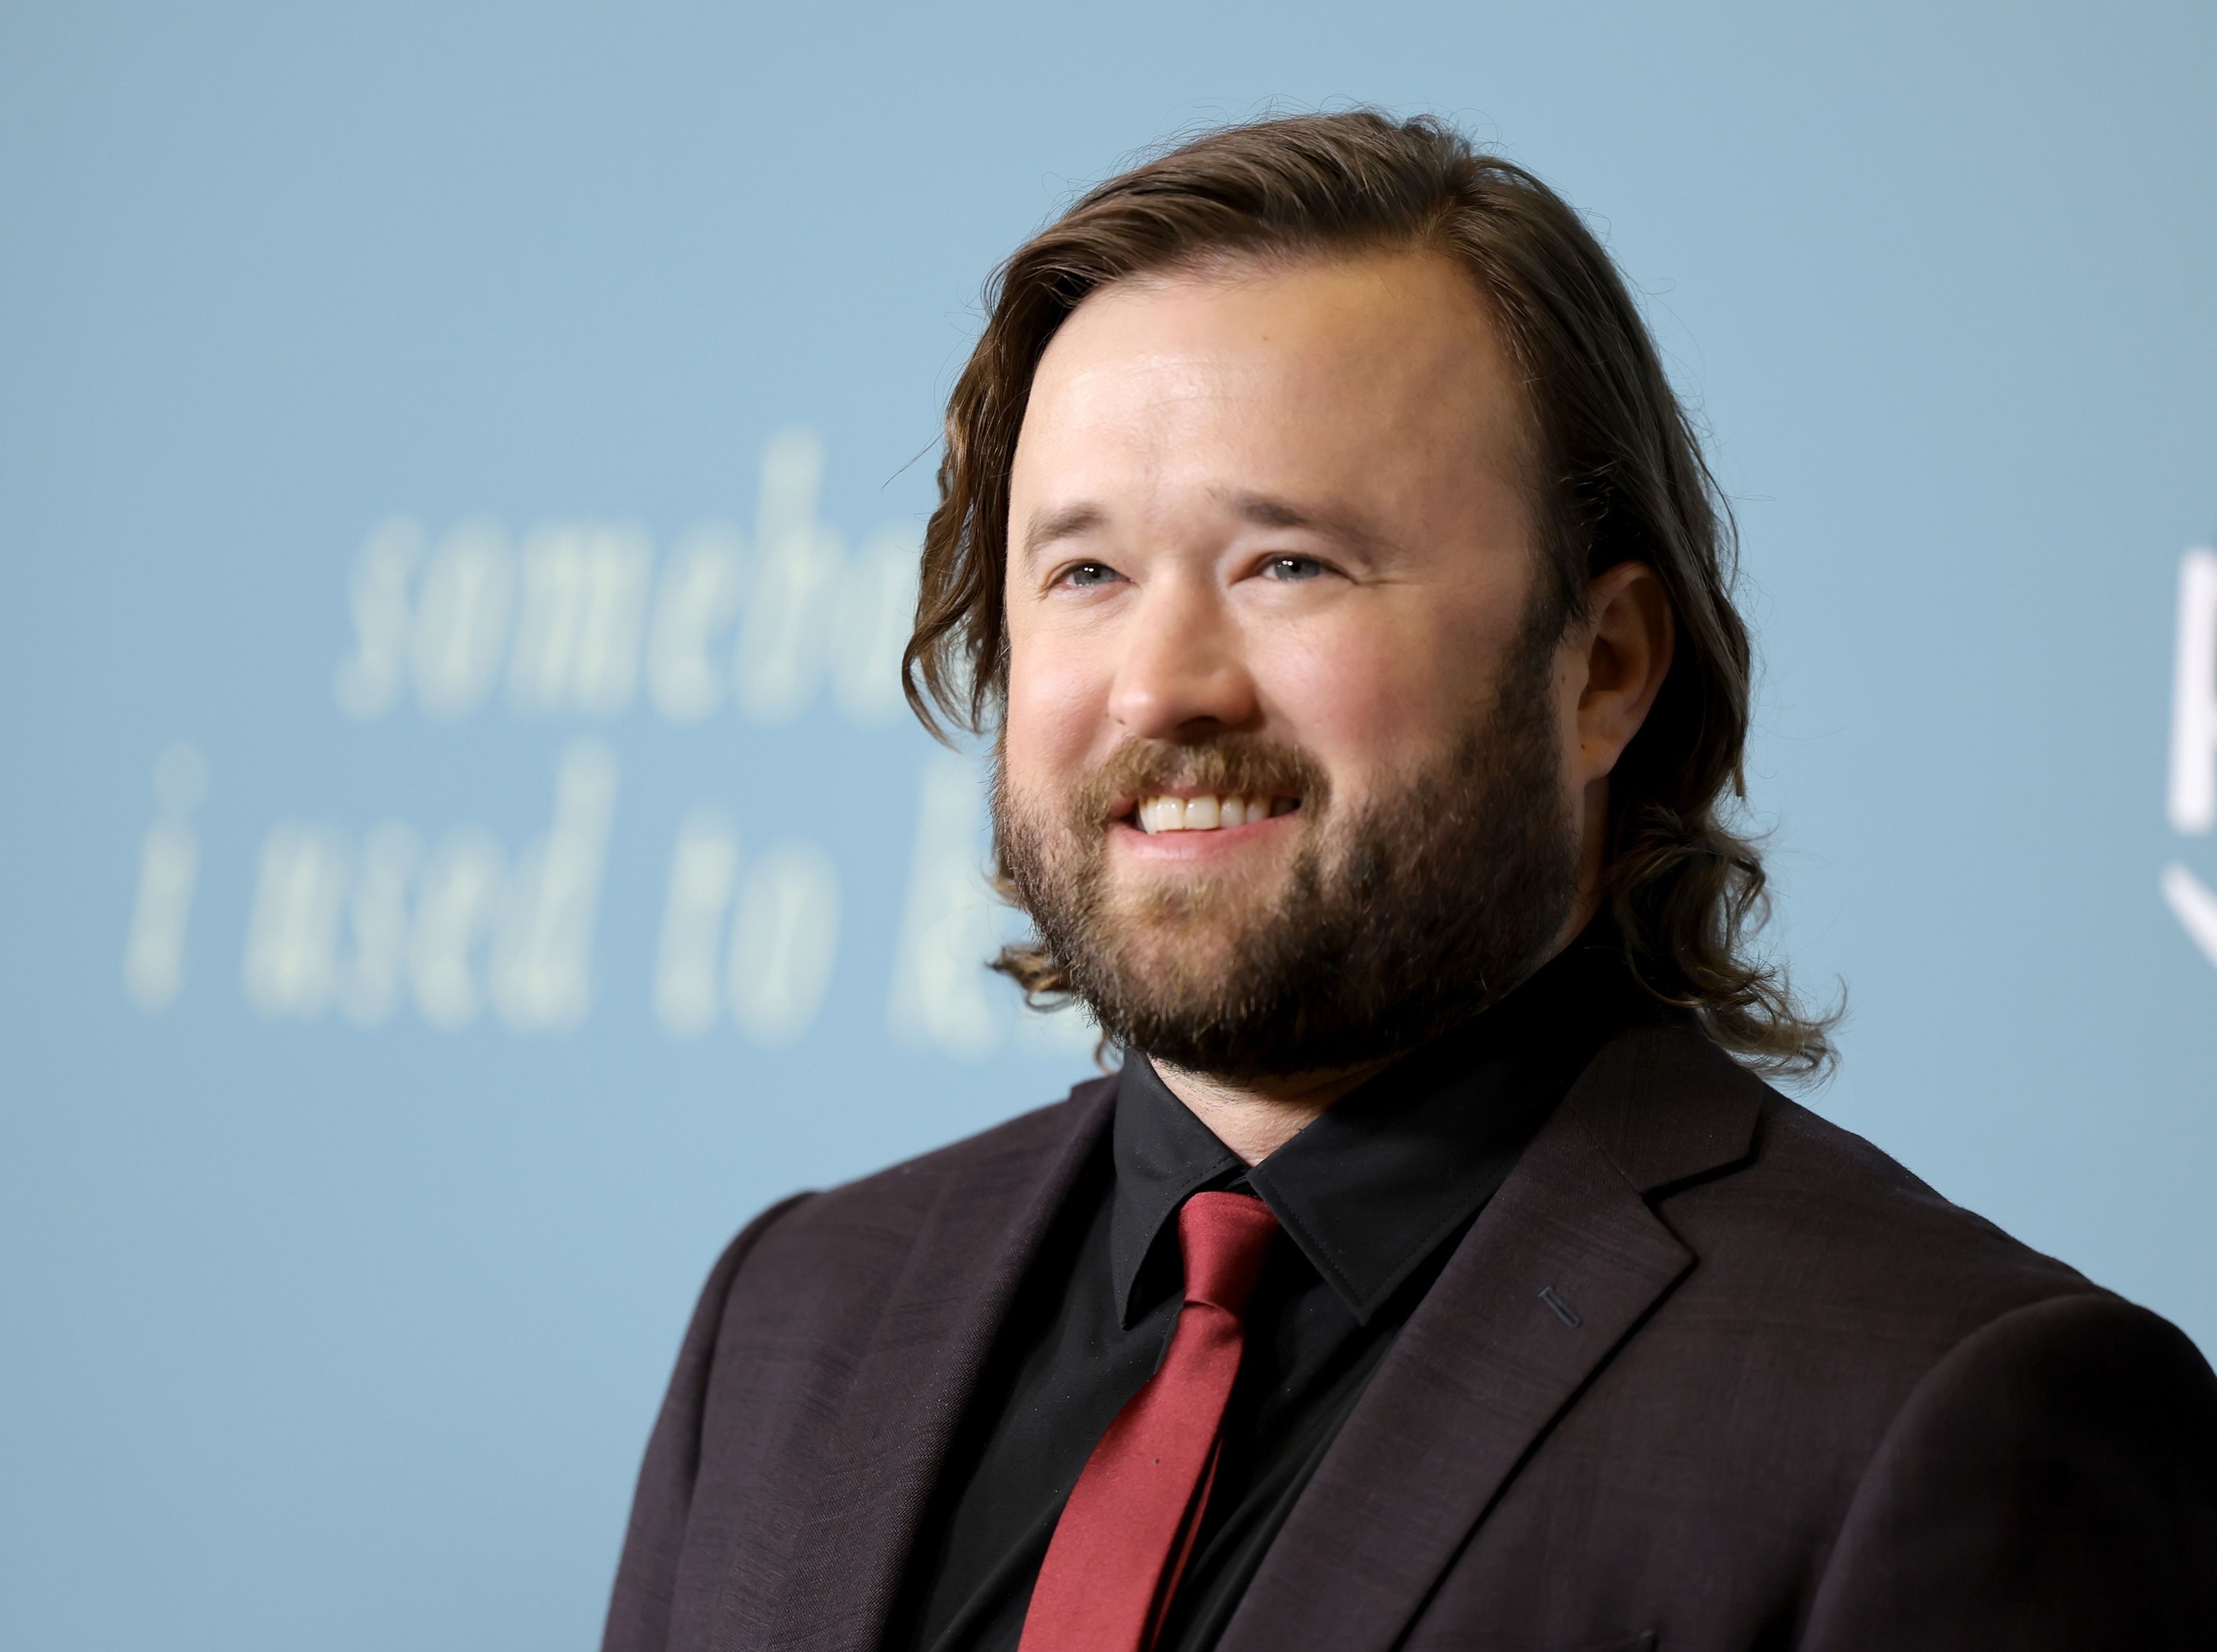 Haley Joel Osment attends movie premiere